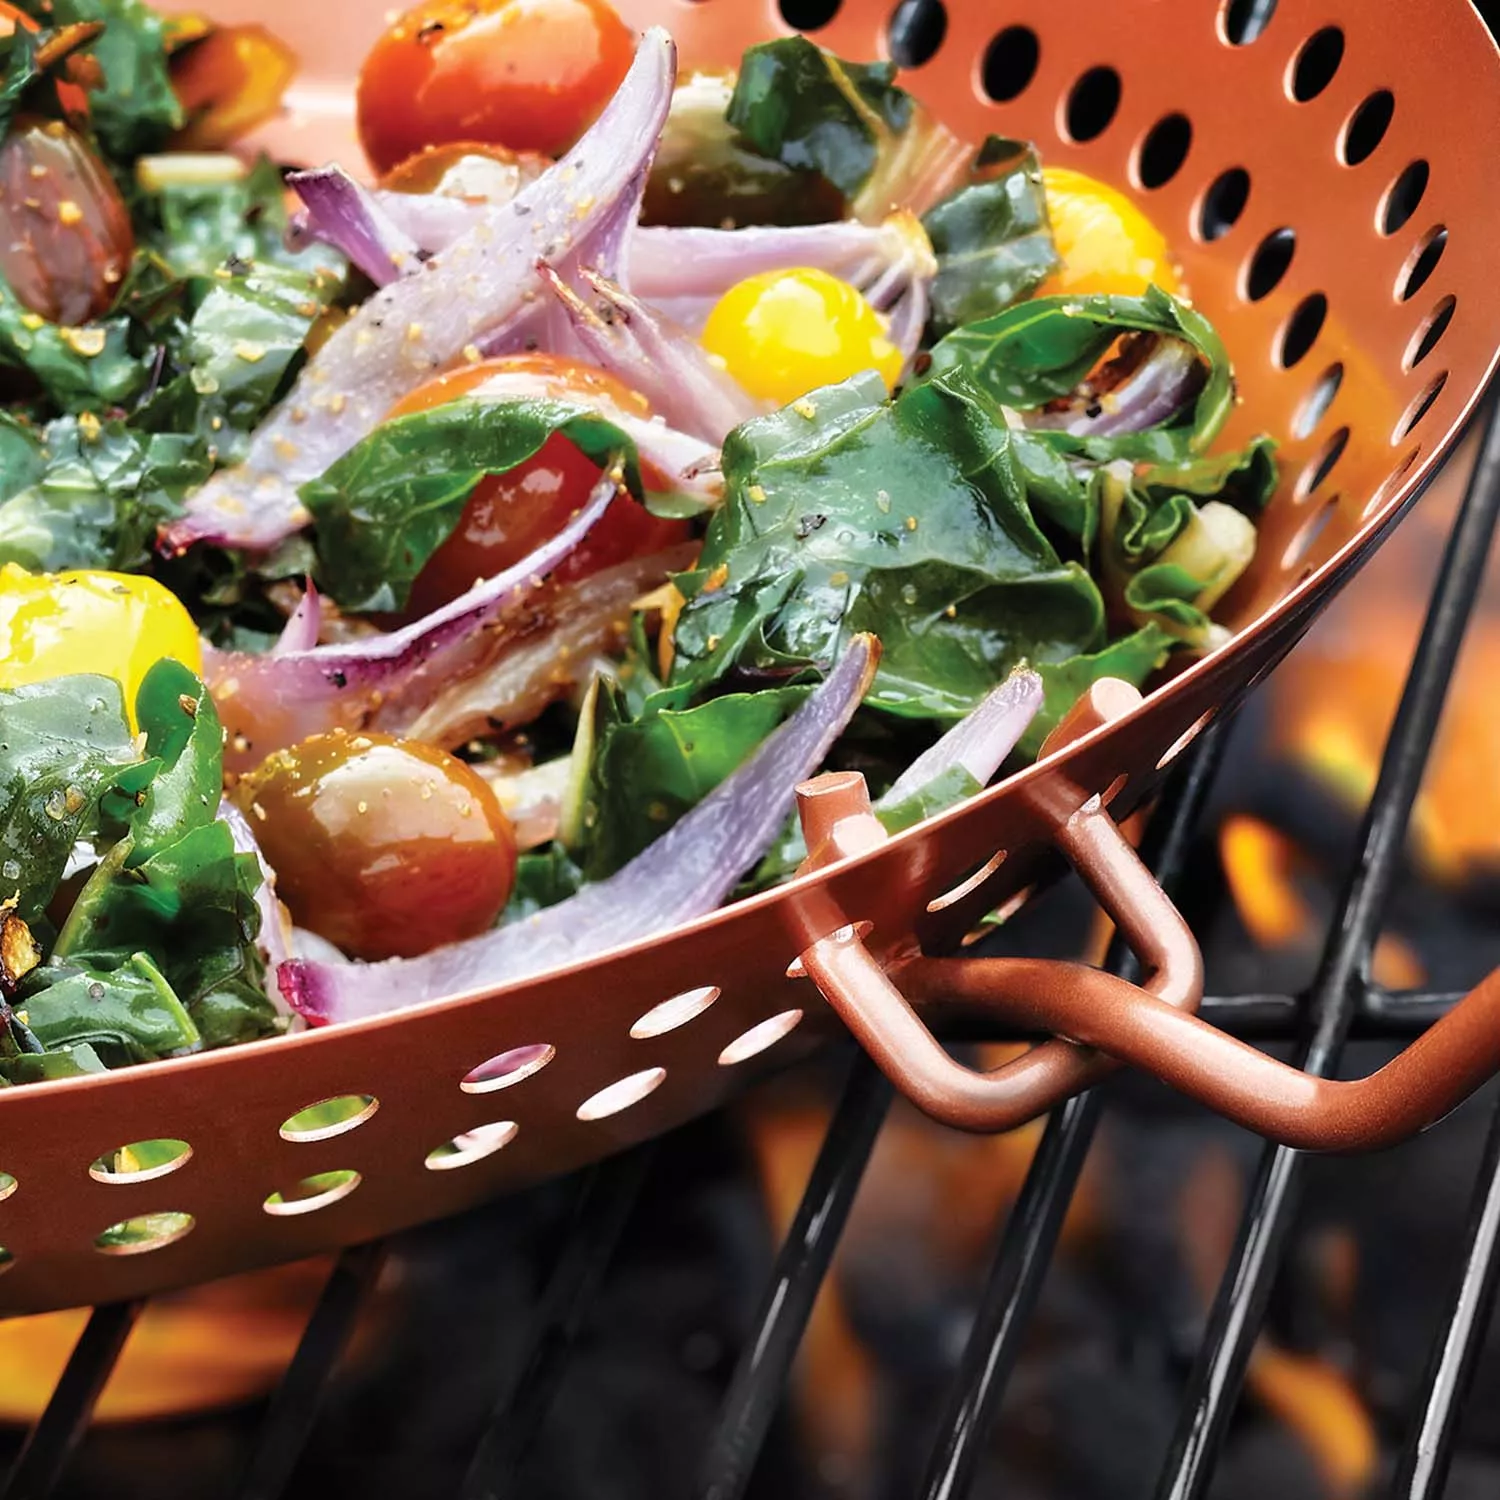 Outset Grill Basket and Skillet